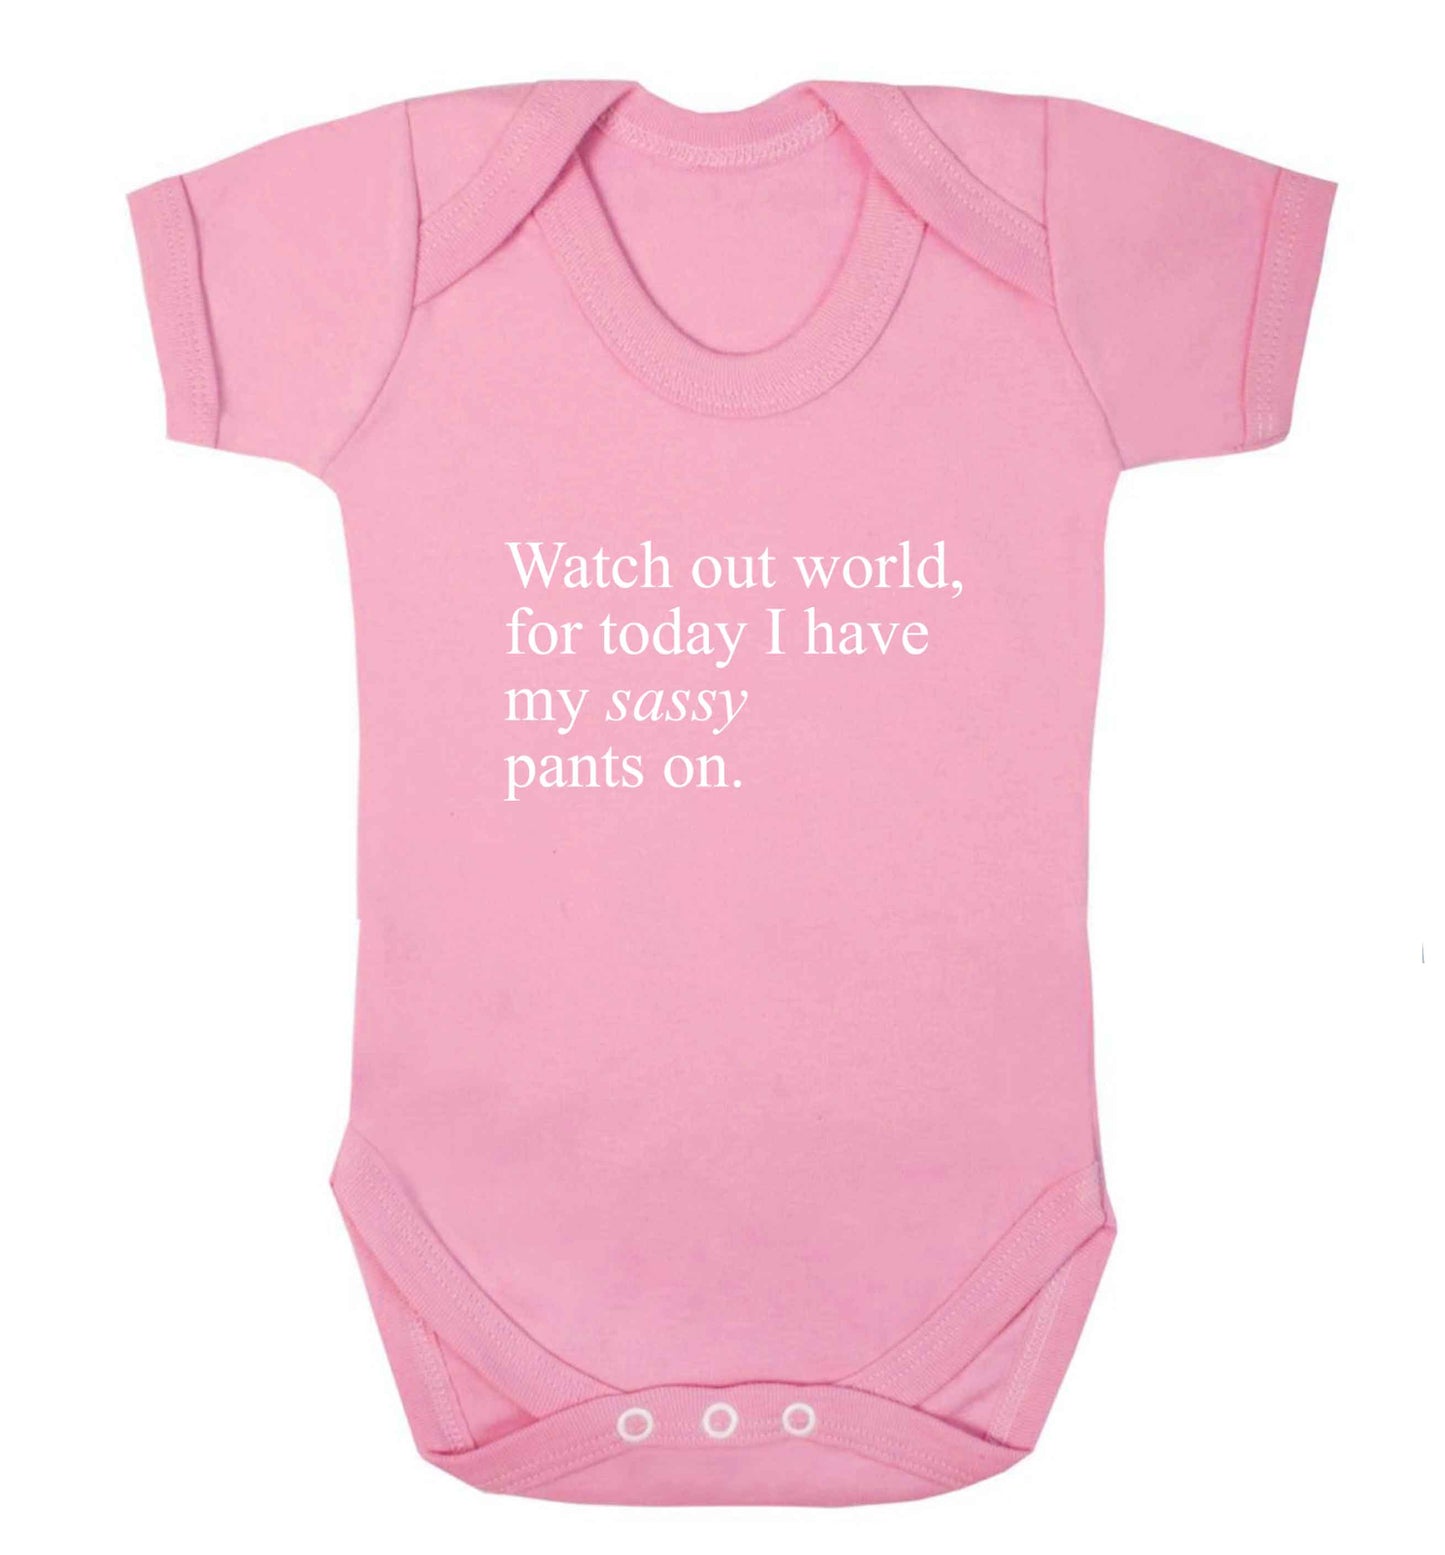 Watch out world for today I have my sassy pants on baby vest pale pink 18-24 months